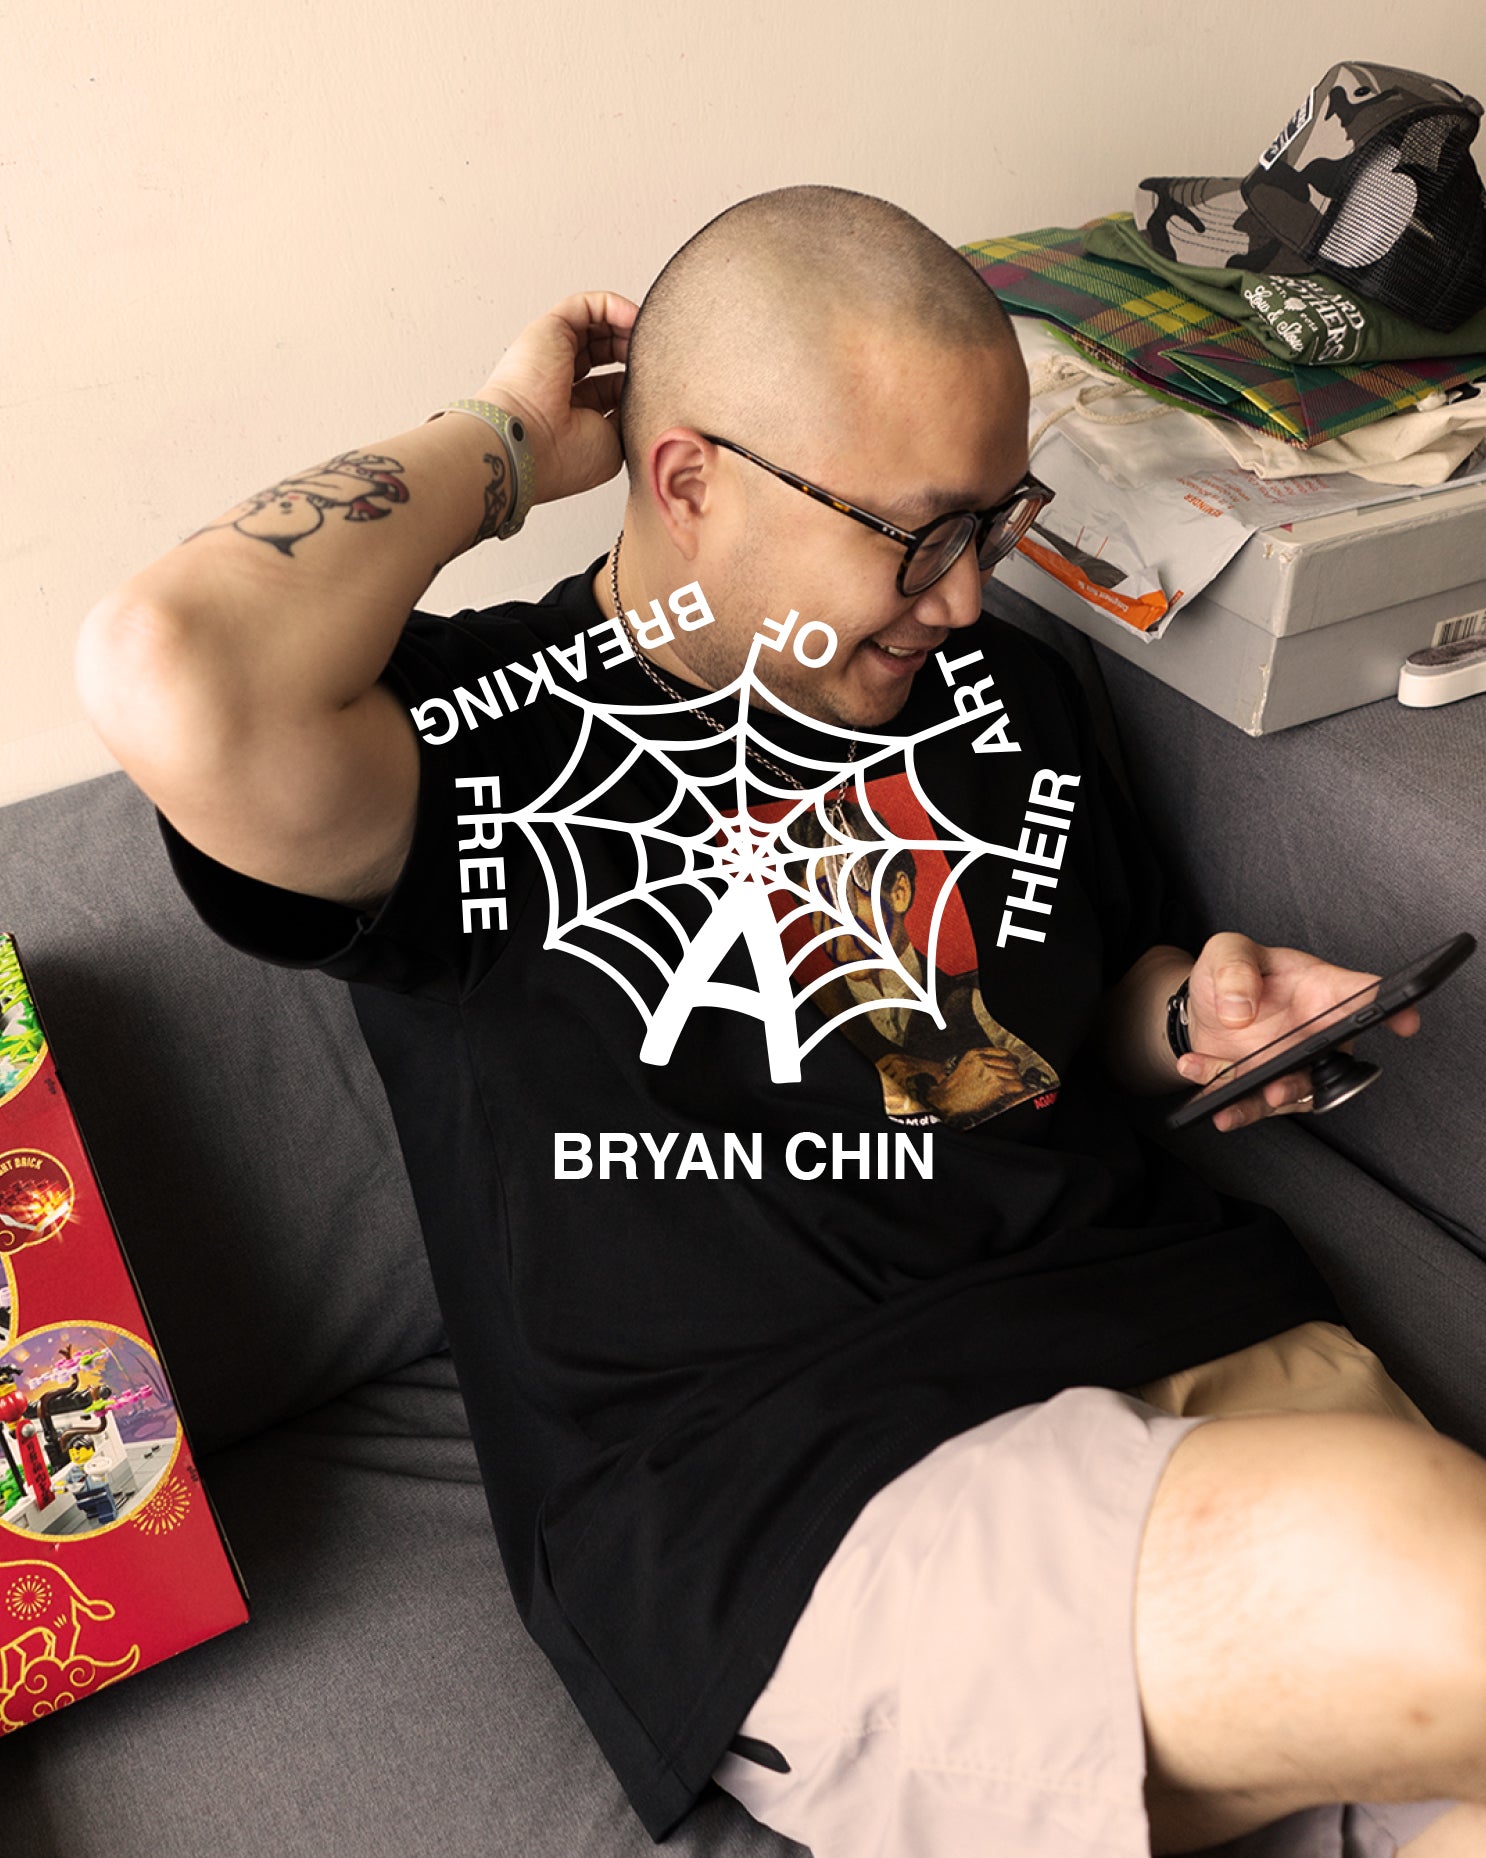 THE ART OF BREAKING FREE WITH BRYAN CHIN